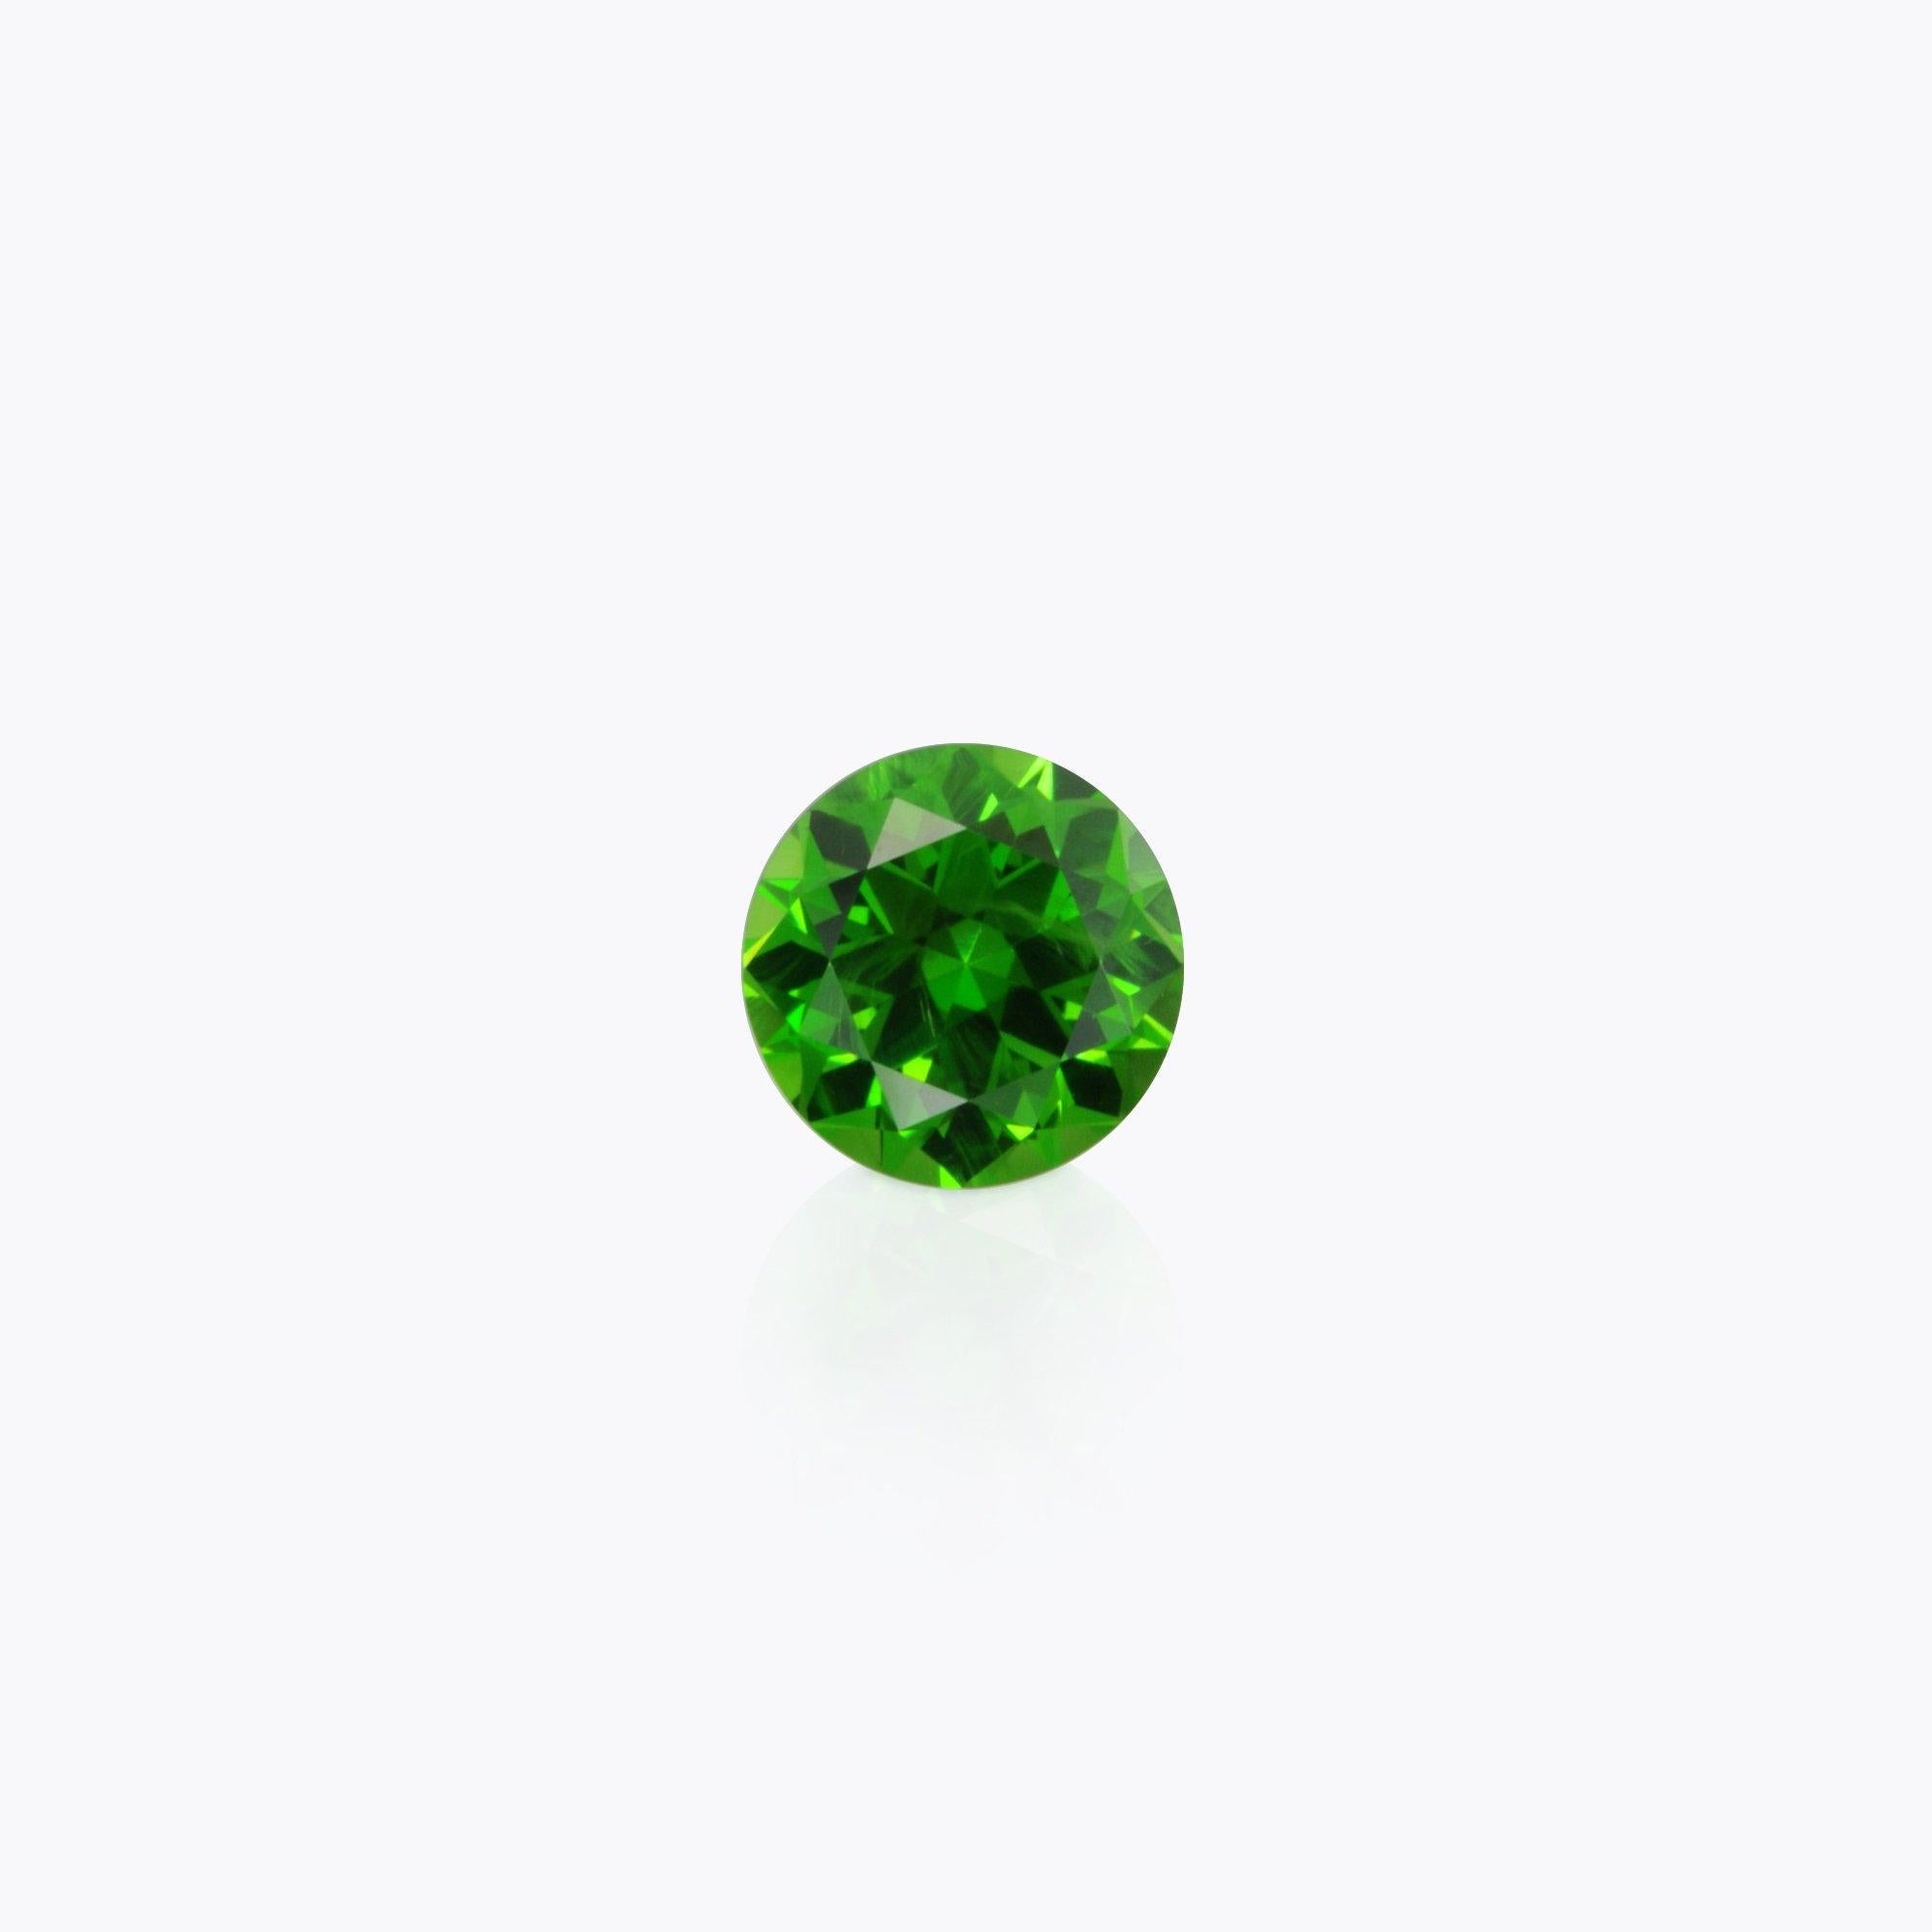 Superb 0.86 carat Russian Demantoid Garnet round gem, offered loose to sophisticated gem collector.
Returns are accepted and paid by us within 7 days of delivery.
We offer supreme custom jewelry work upon request. Please contact us for more